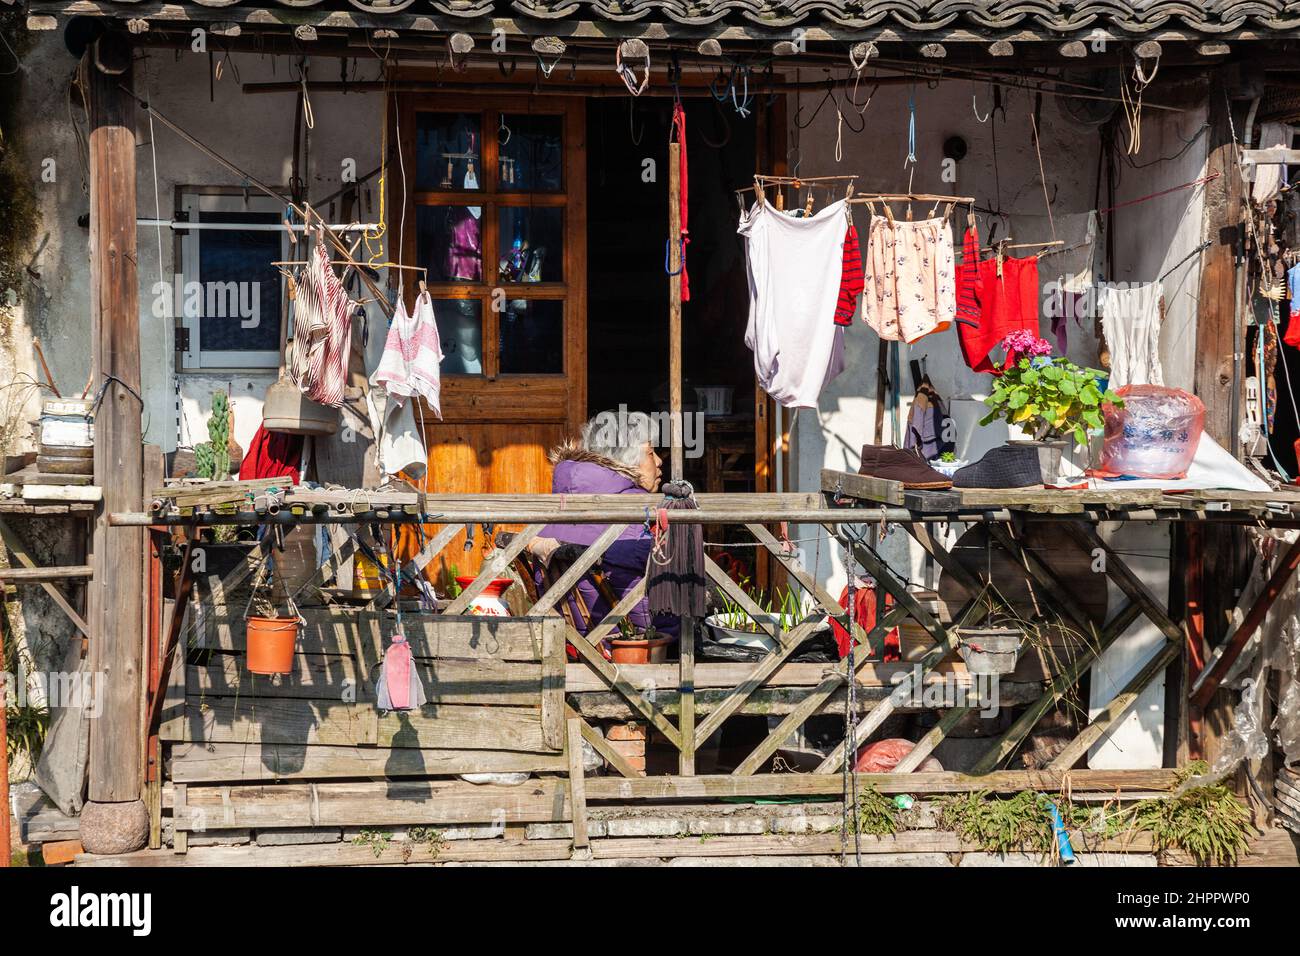 Woman sitting on a balcony cluttered with various objects, trying to warm himself in the winter sun in the water village of Wenzhou, China Stock Photo